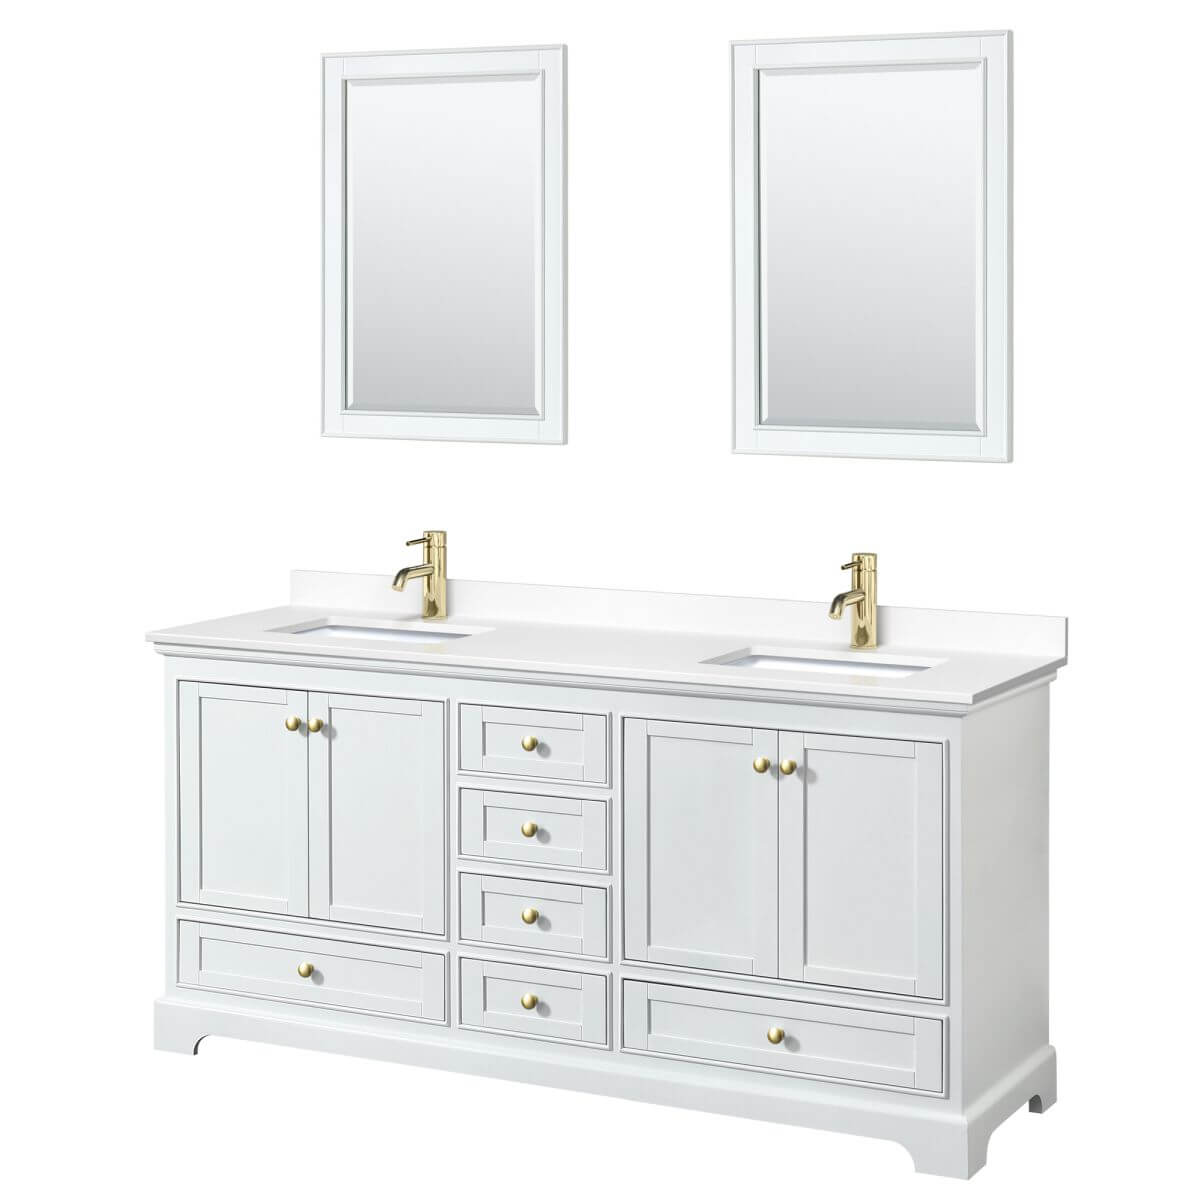 Wyndham Collection Deborah 72 inch Double Bathroom Vanity in White with White Cultured Marble Countertop, Undermount Square Sinks, Brushed Gold Trim and 24 inch Mirrors - WCS202072DWGWCUNSM24